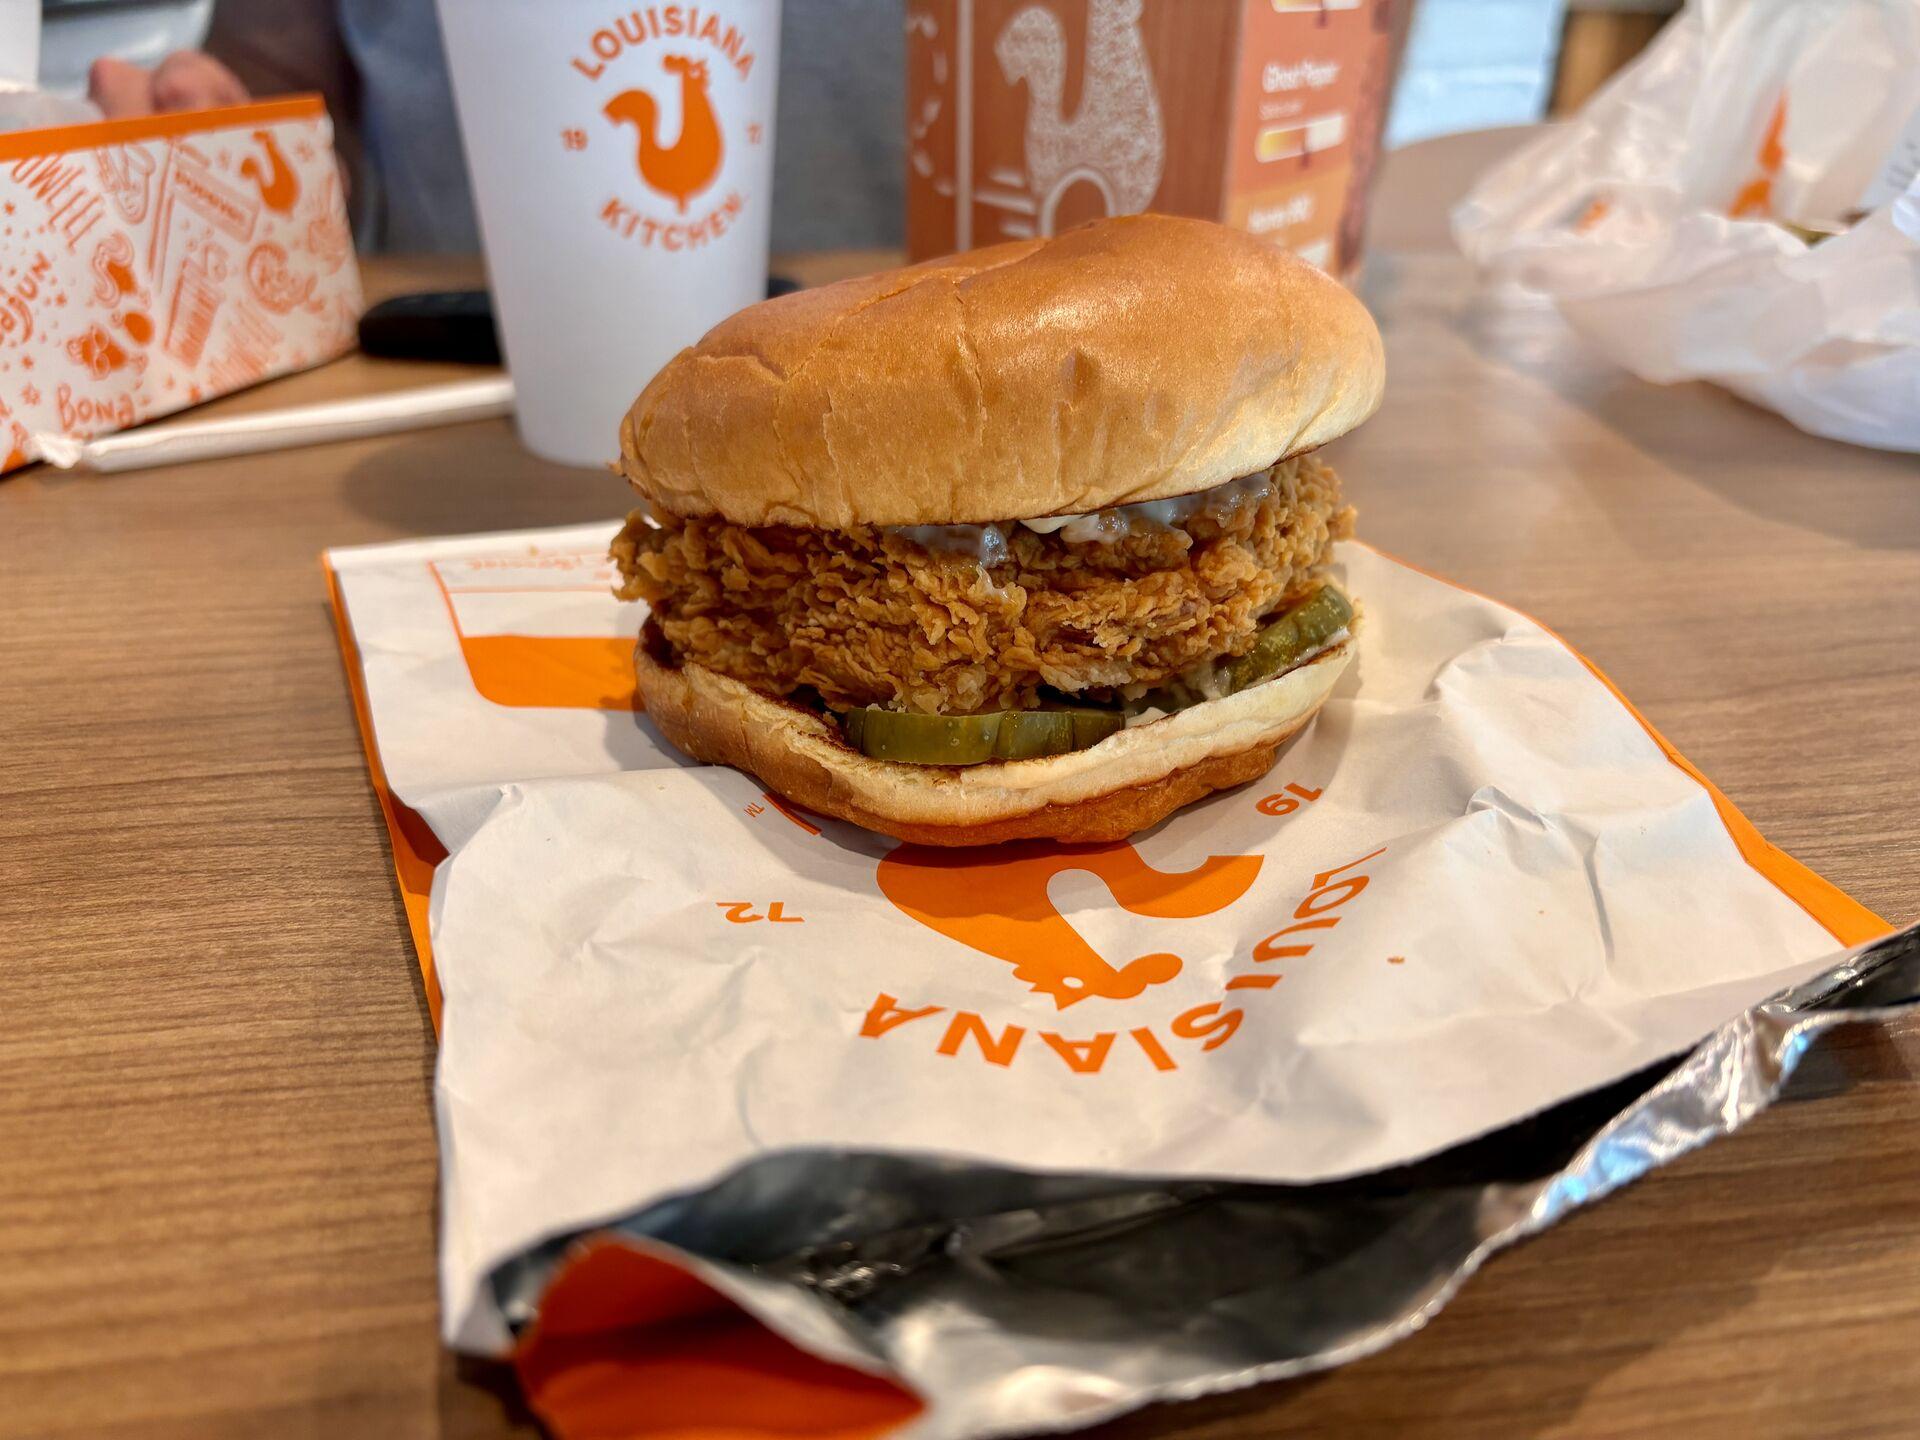 A chicken sandwich literally bursting with pickles on a paper bag, with various other Popeyes memorabilia in the background.